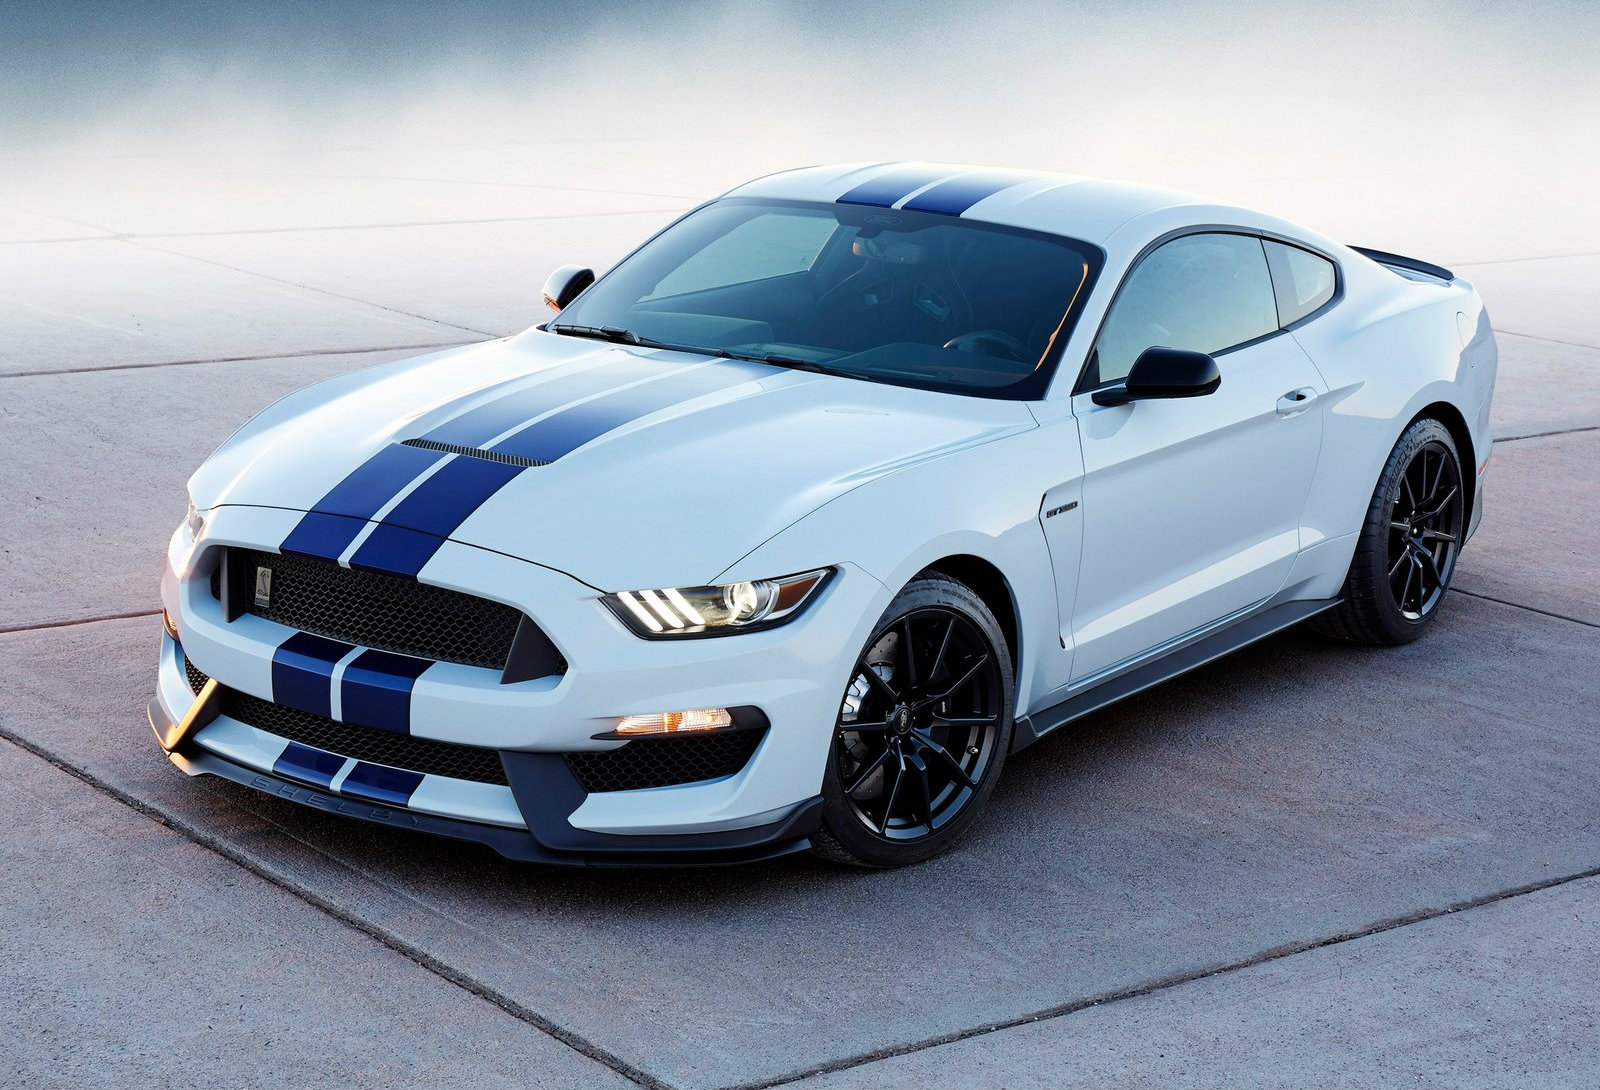 2016-ford-mustang-shelby-gt350-to-sport-a-52995-price-tag-convertible-in-the-pipeline-89526_1.jpg